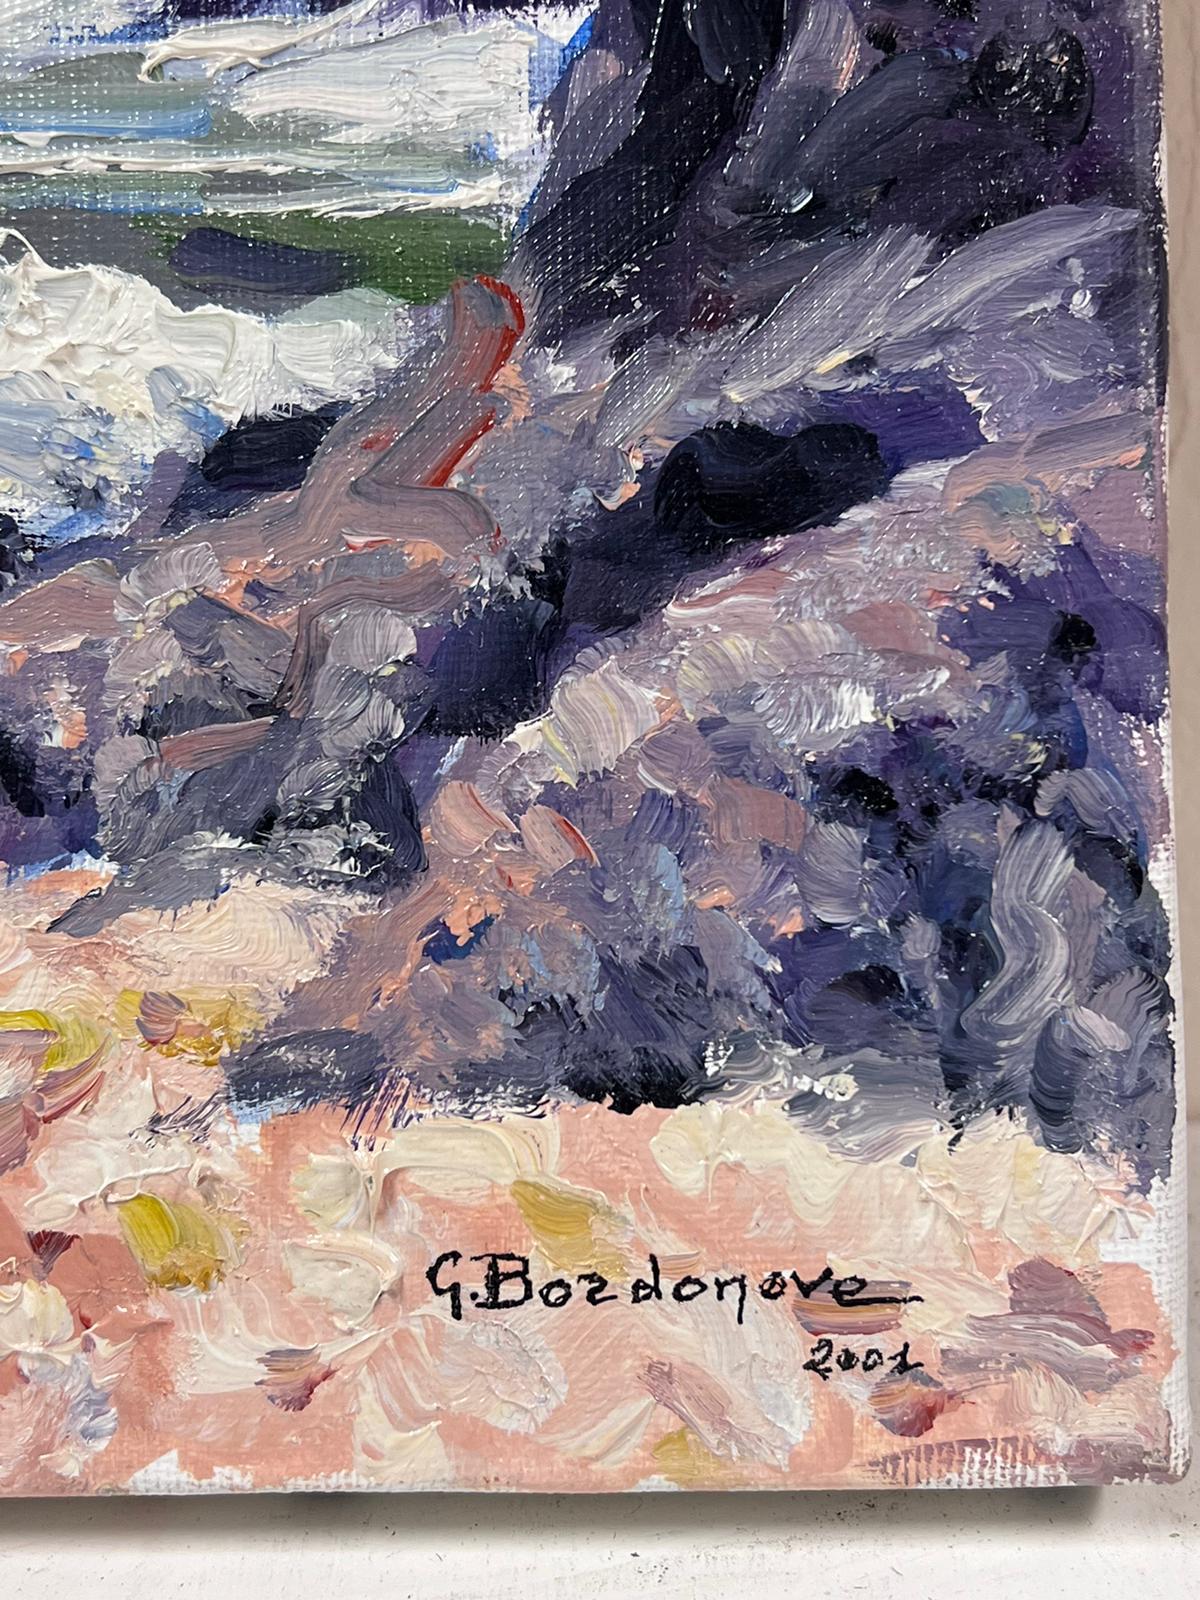 Purple Sea Landscape
by Georges Bordonave (French contemporary) 
dated 2001
signed oil painting on canvas, unframed
canvas: 10.75 x 16 inches
condition: very good
provenance: from a large private collection of this artists work, western Paris,